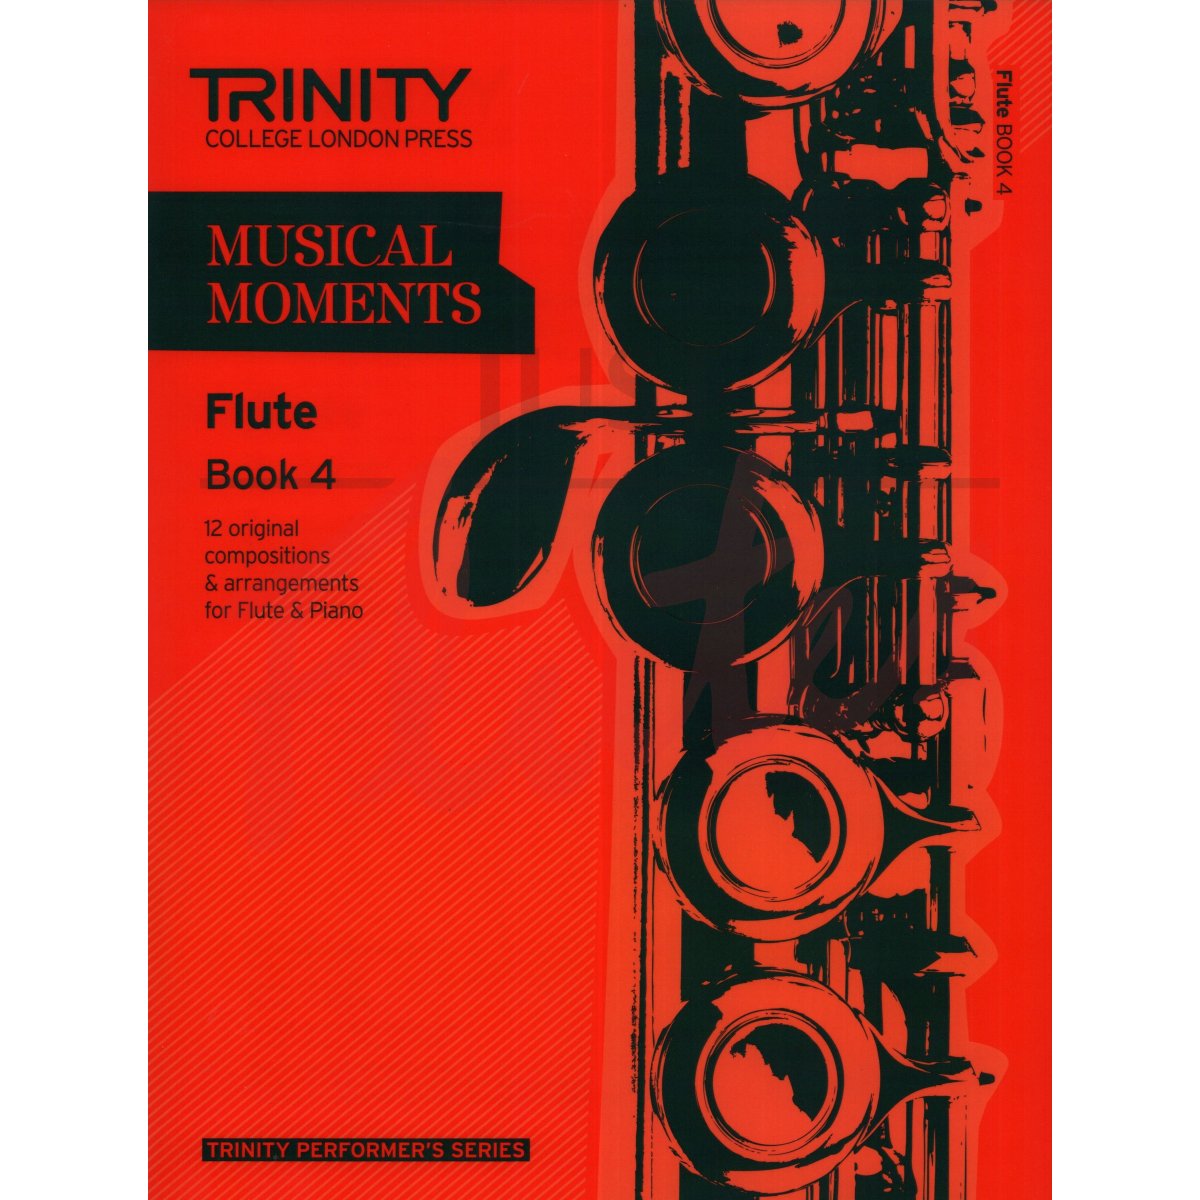 Musical Moments for Flute and Piano